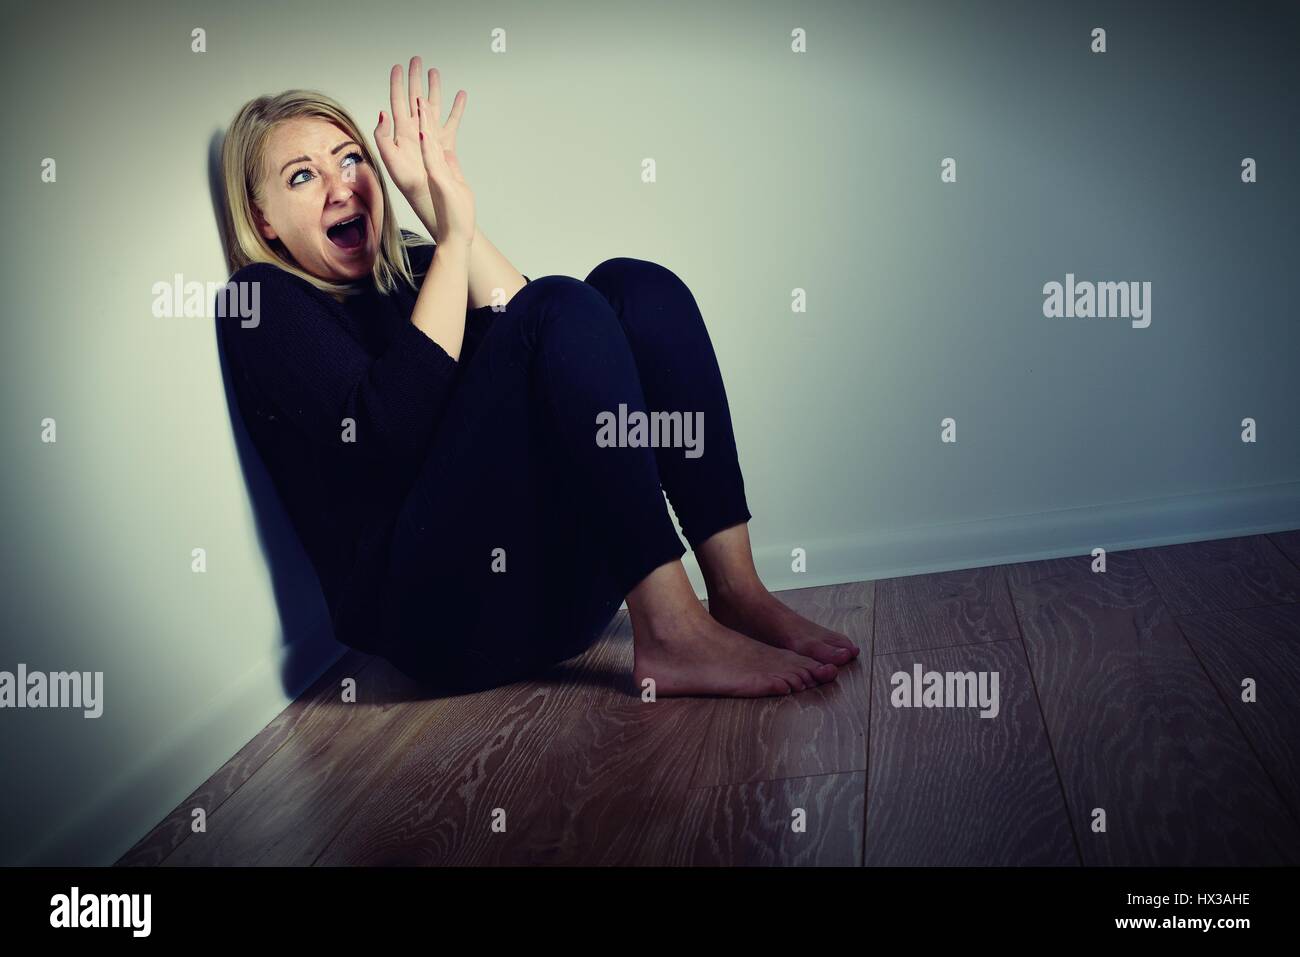 Scared woman. Afraid and screaming. Stock Photo